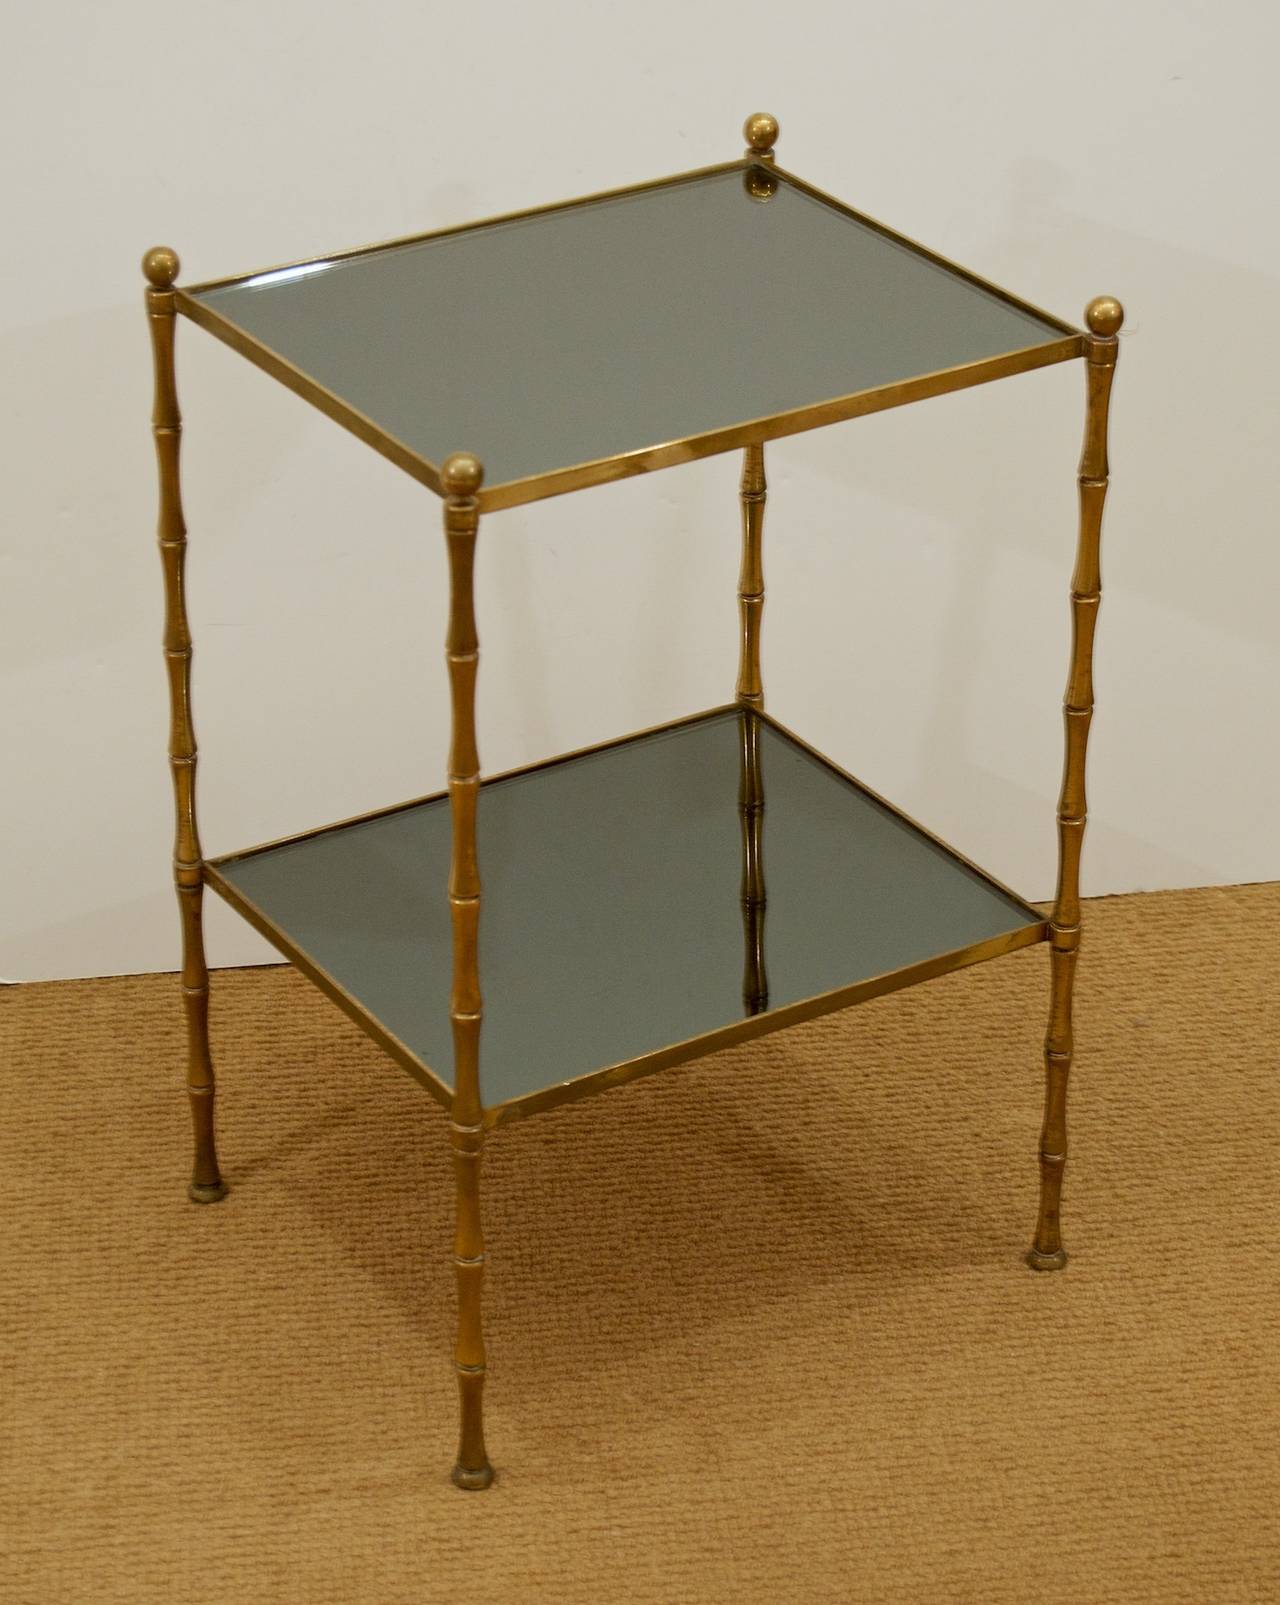 This elegant brass two-tiered table with black glass mirror has multifunctional use and elegant style to fit in all decors.